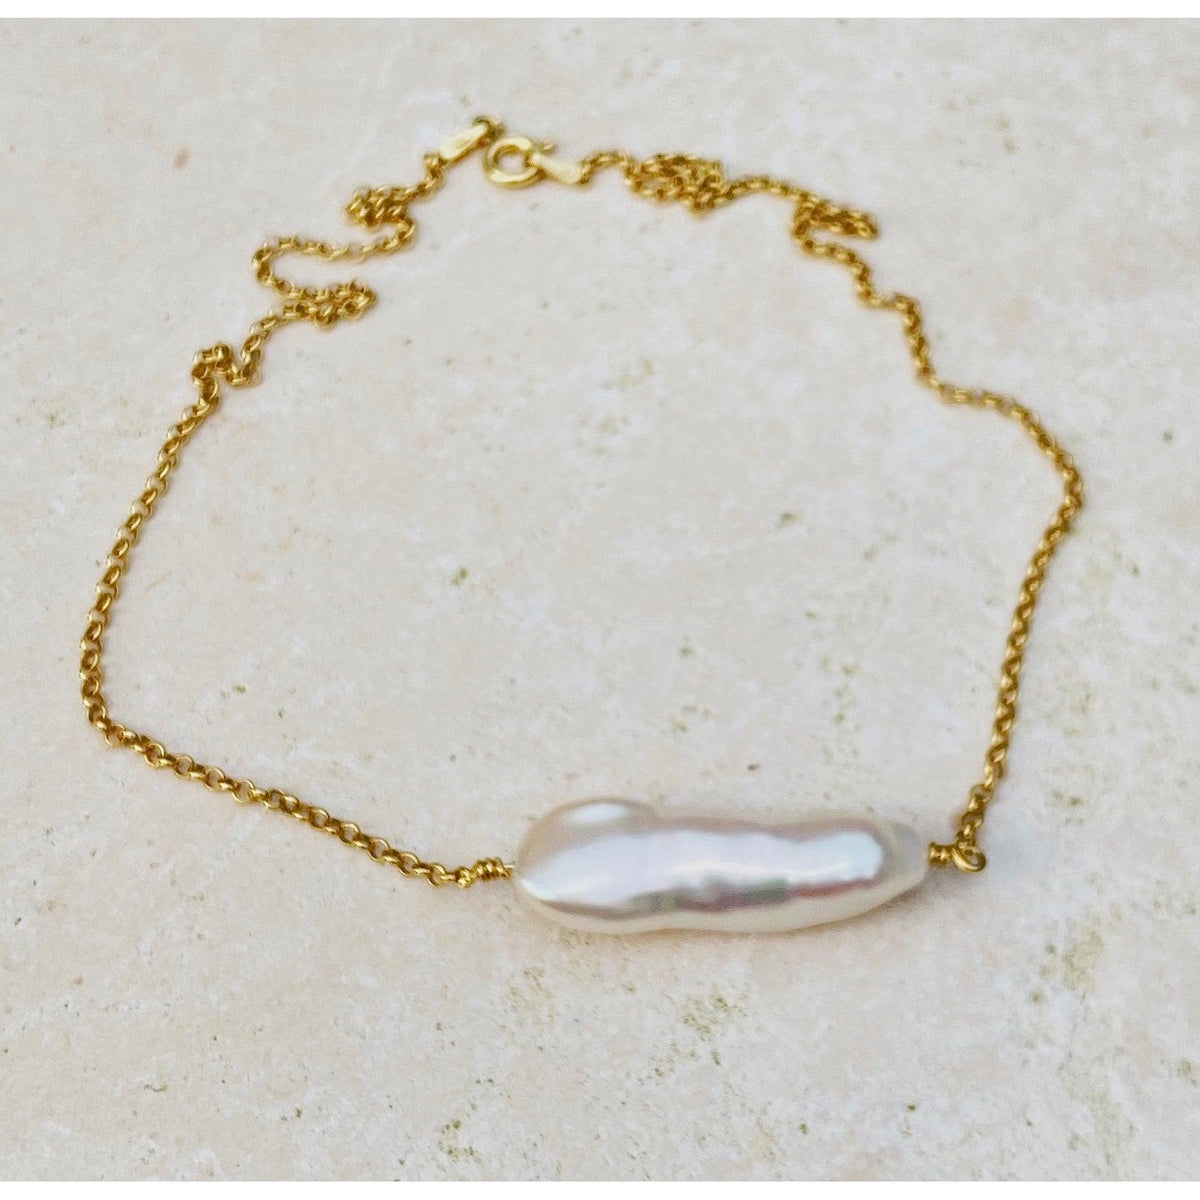 Holiday Necklace - White Freshwater Pearl Necklace